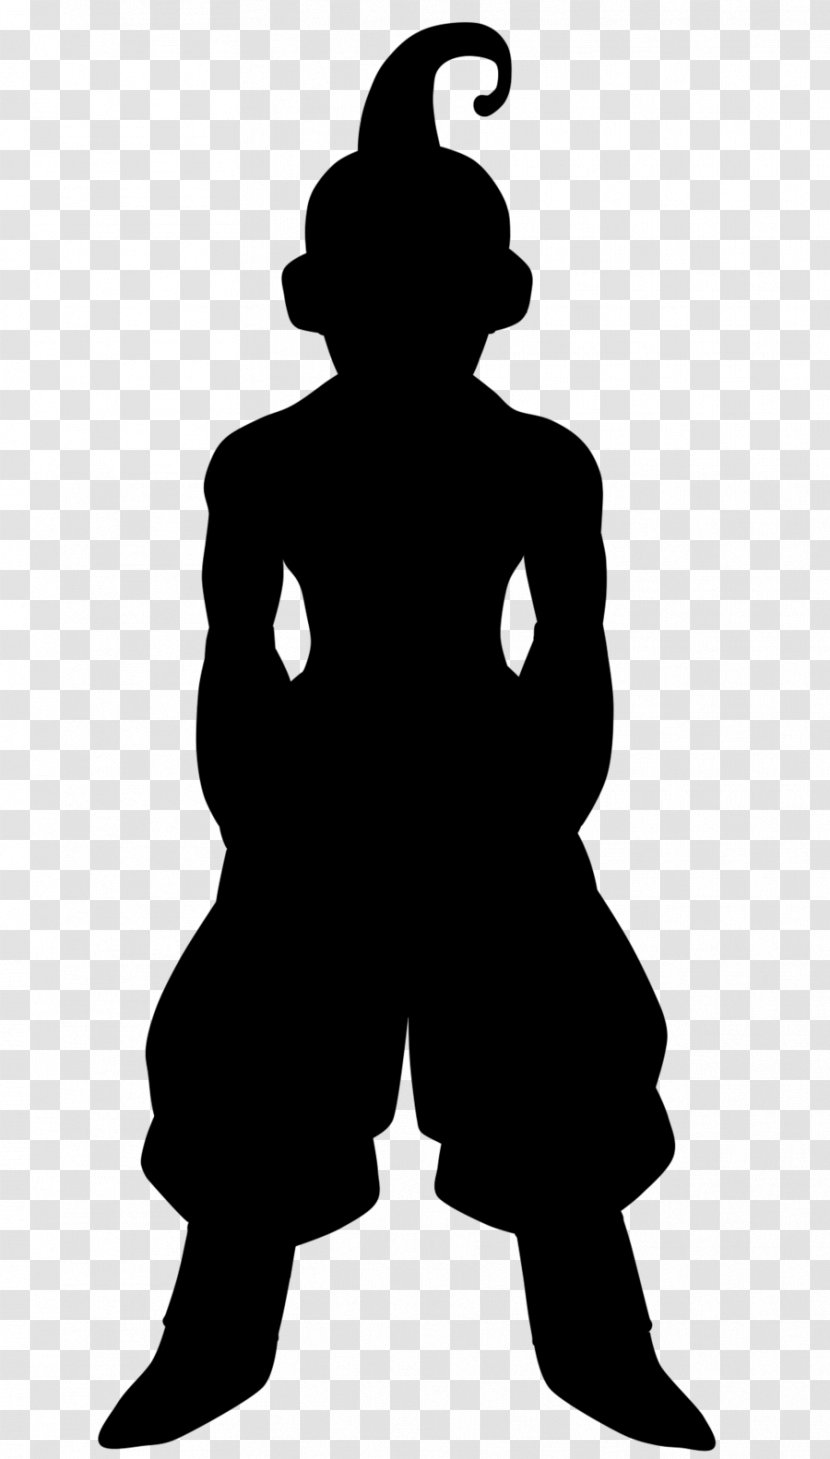 Silhouette - Openoffice Draw - Fictional Character Transparent PNG